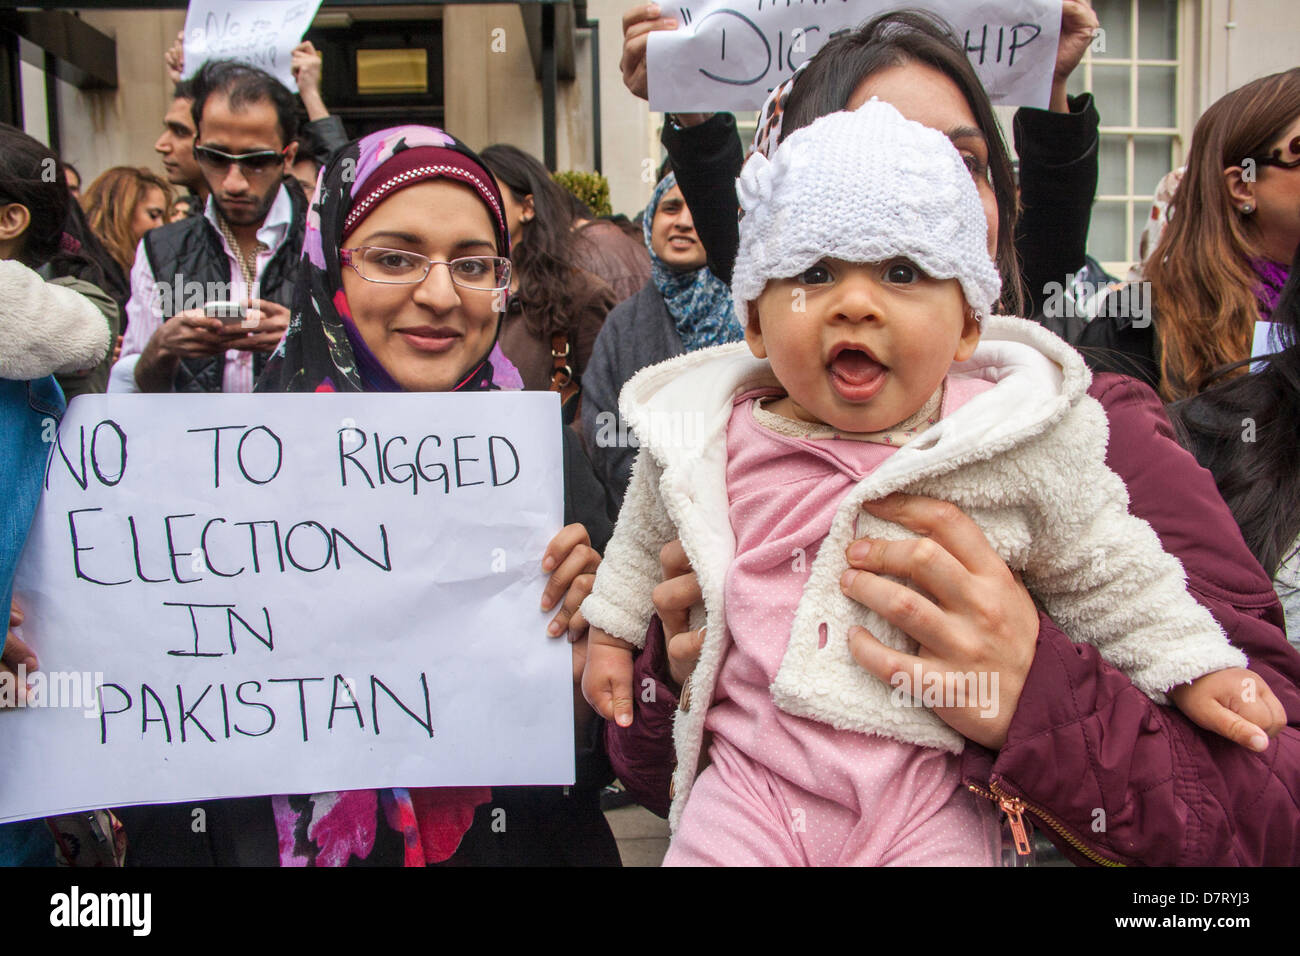 London, UK. 13th May, 2013. Pakistani protesters of all ages demonstrated against alleged electoral fraud in the recent Pakistani general election. Credit: Paul Davey/Alamy Live News Stock Photo